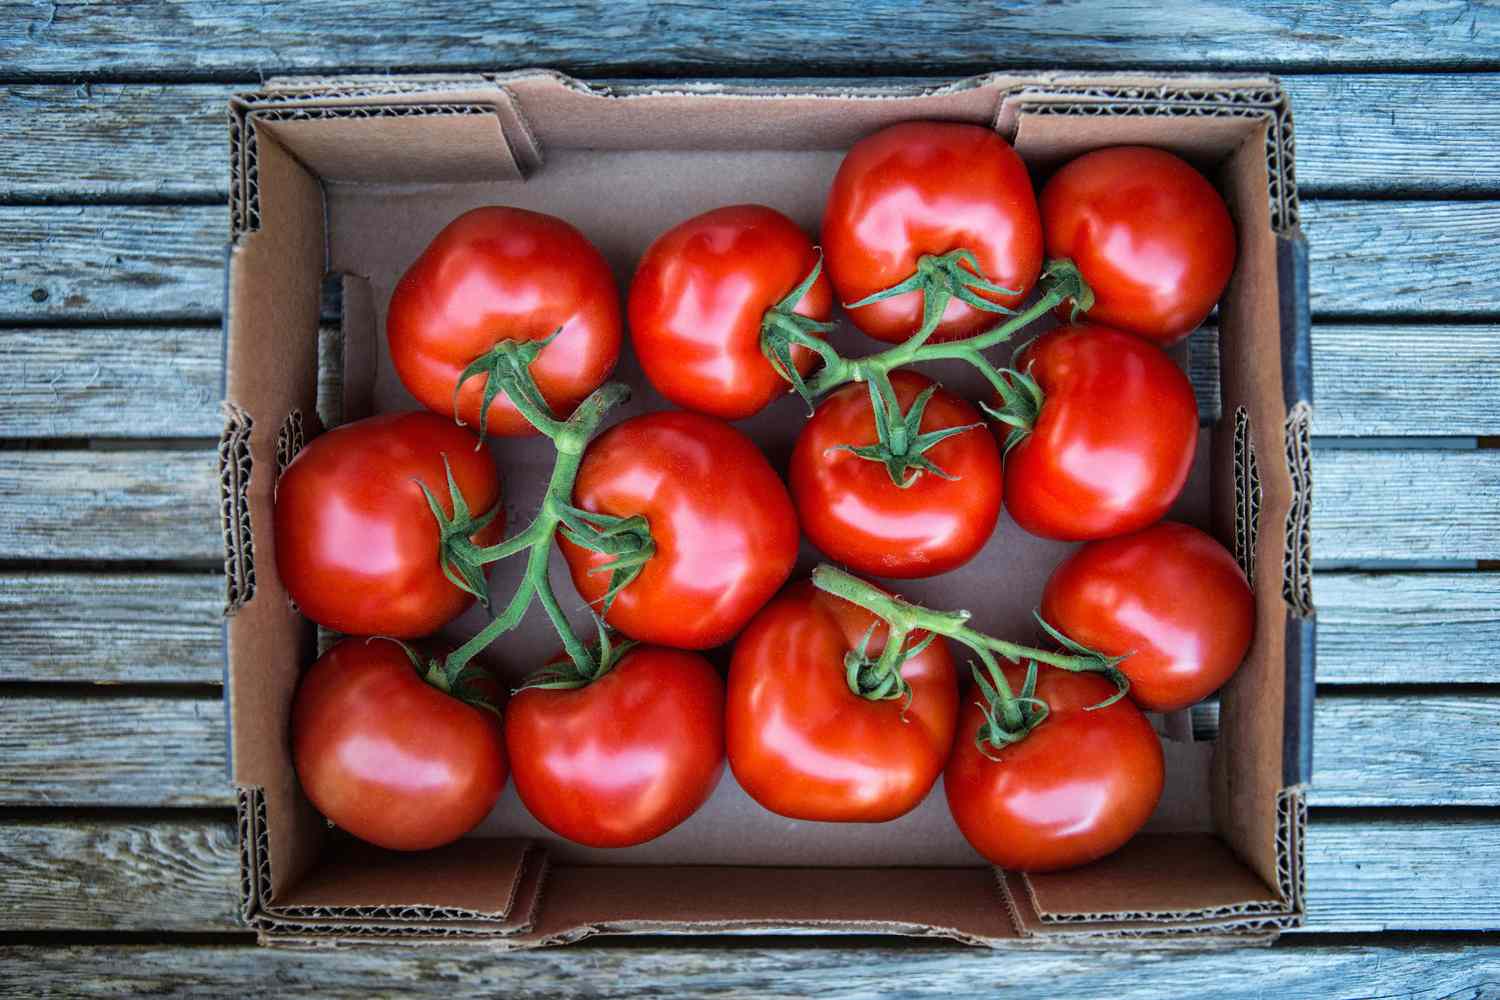 How To Store Ripe Tomatoes